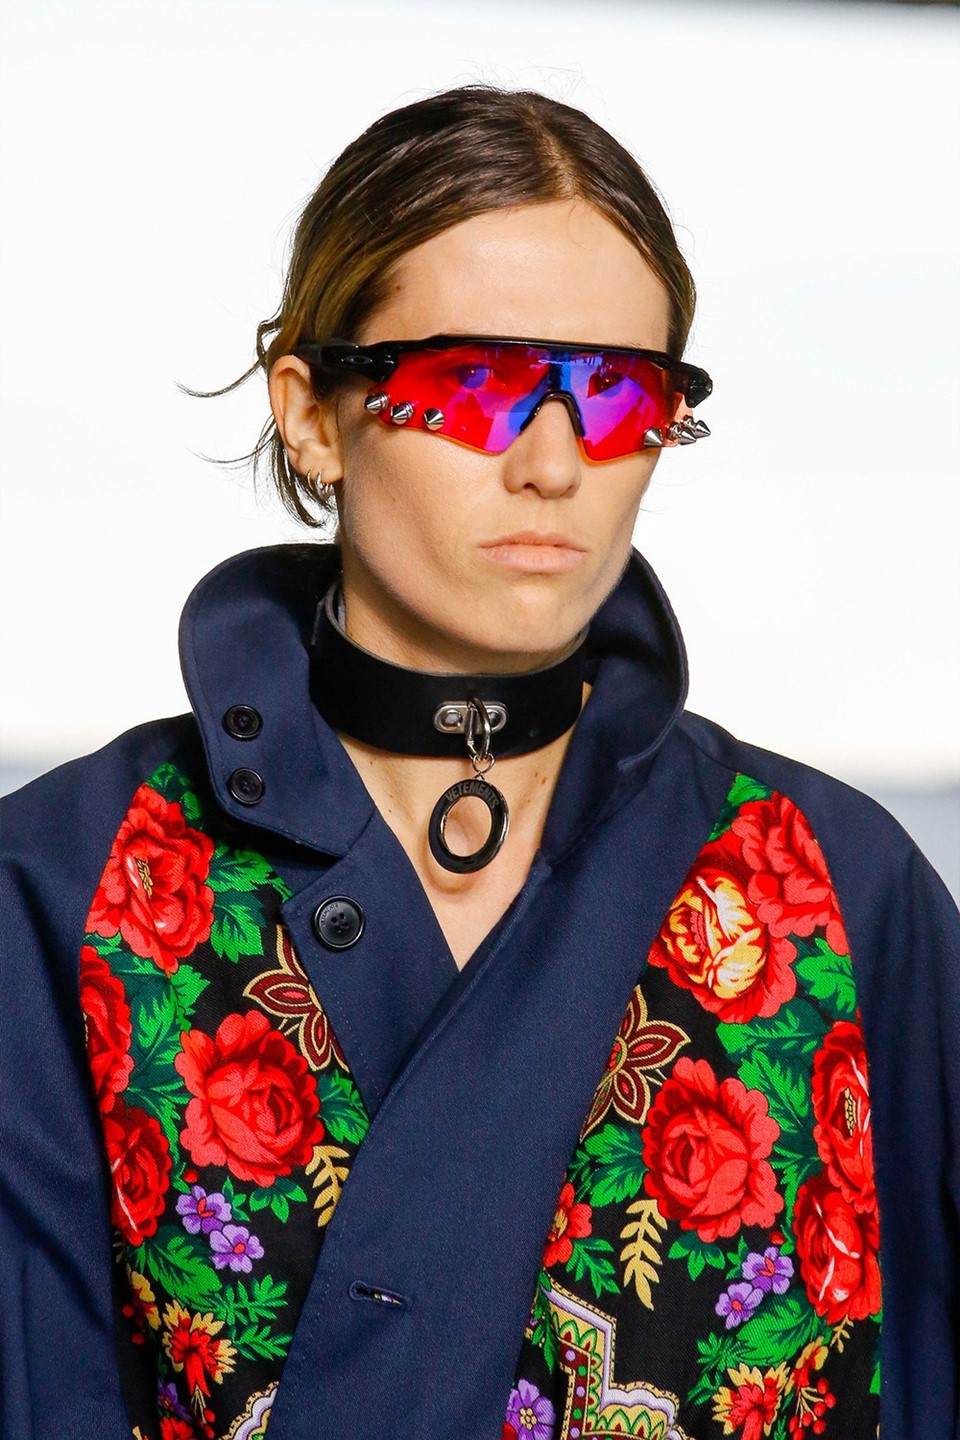 From Vetements to Palace, cycling shades are so hot right now | Dazed